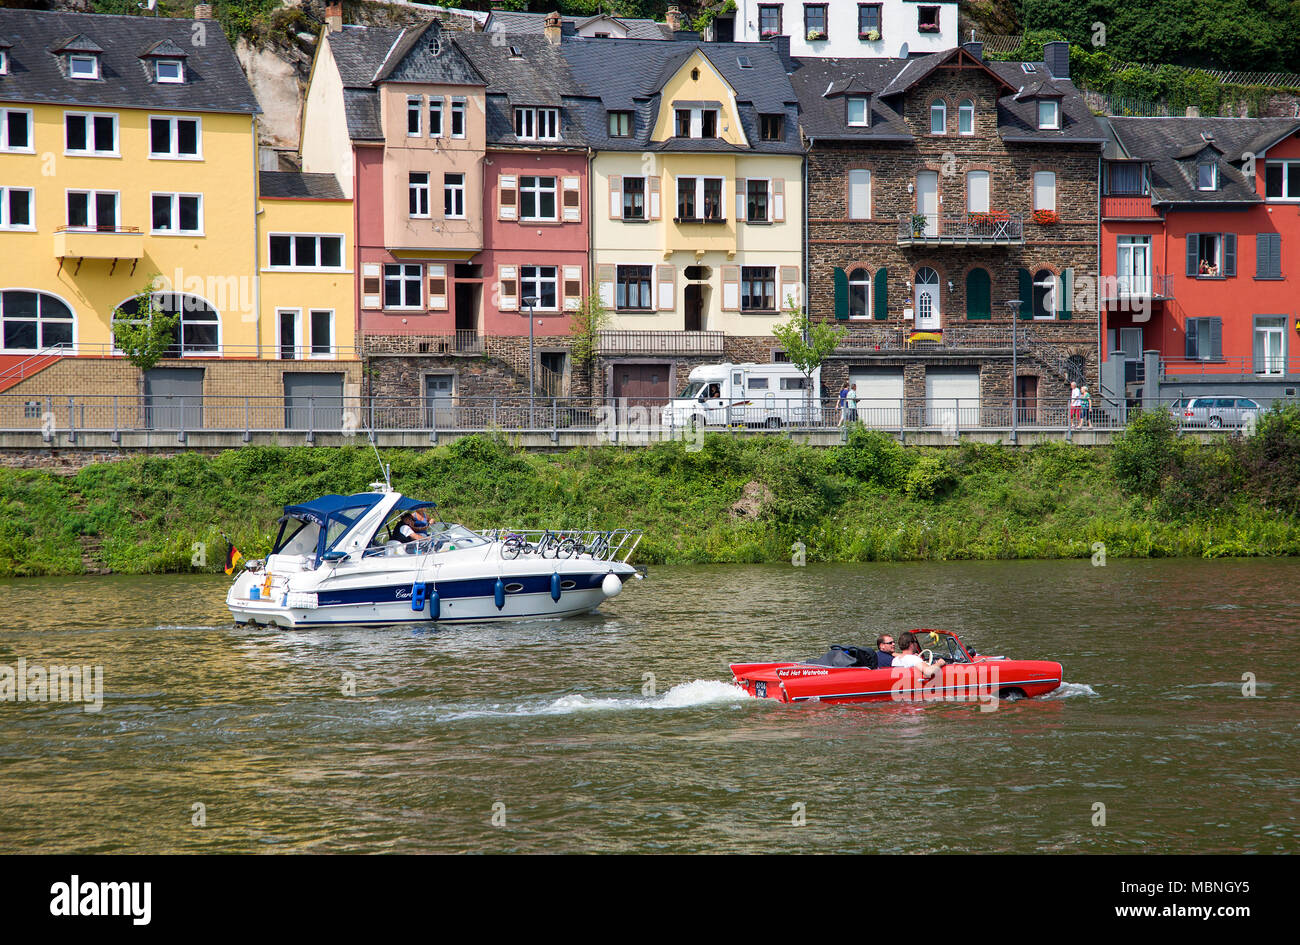 Amphic car, a german amphibious vehicle driving next to a motor boat on Moselle river at Cochem, Rhineland-Palatinate, Germany Stock Photo